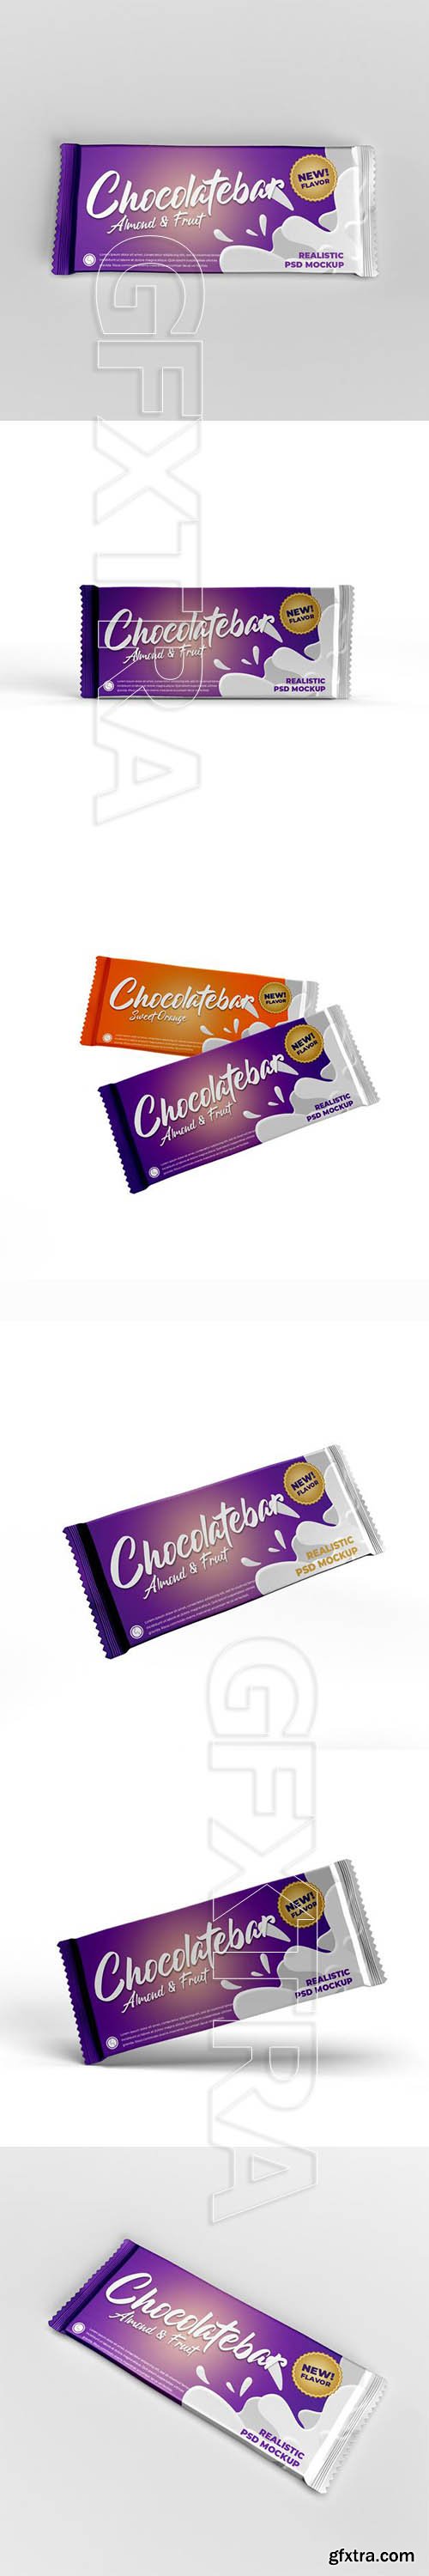 Chocolate bar doff foil matte product packaging advertising mockup